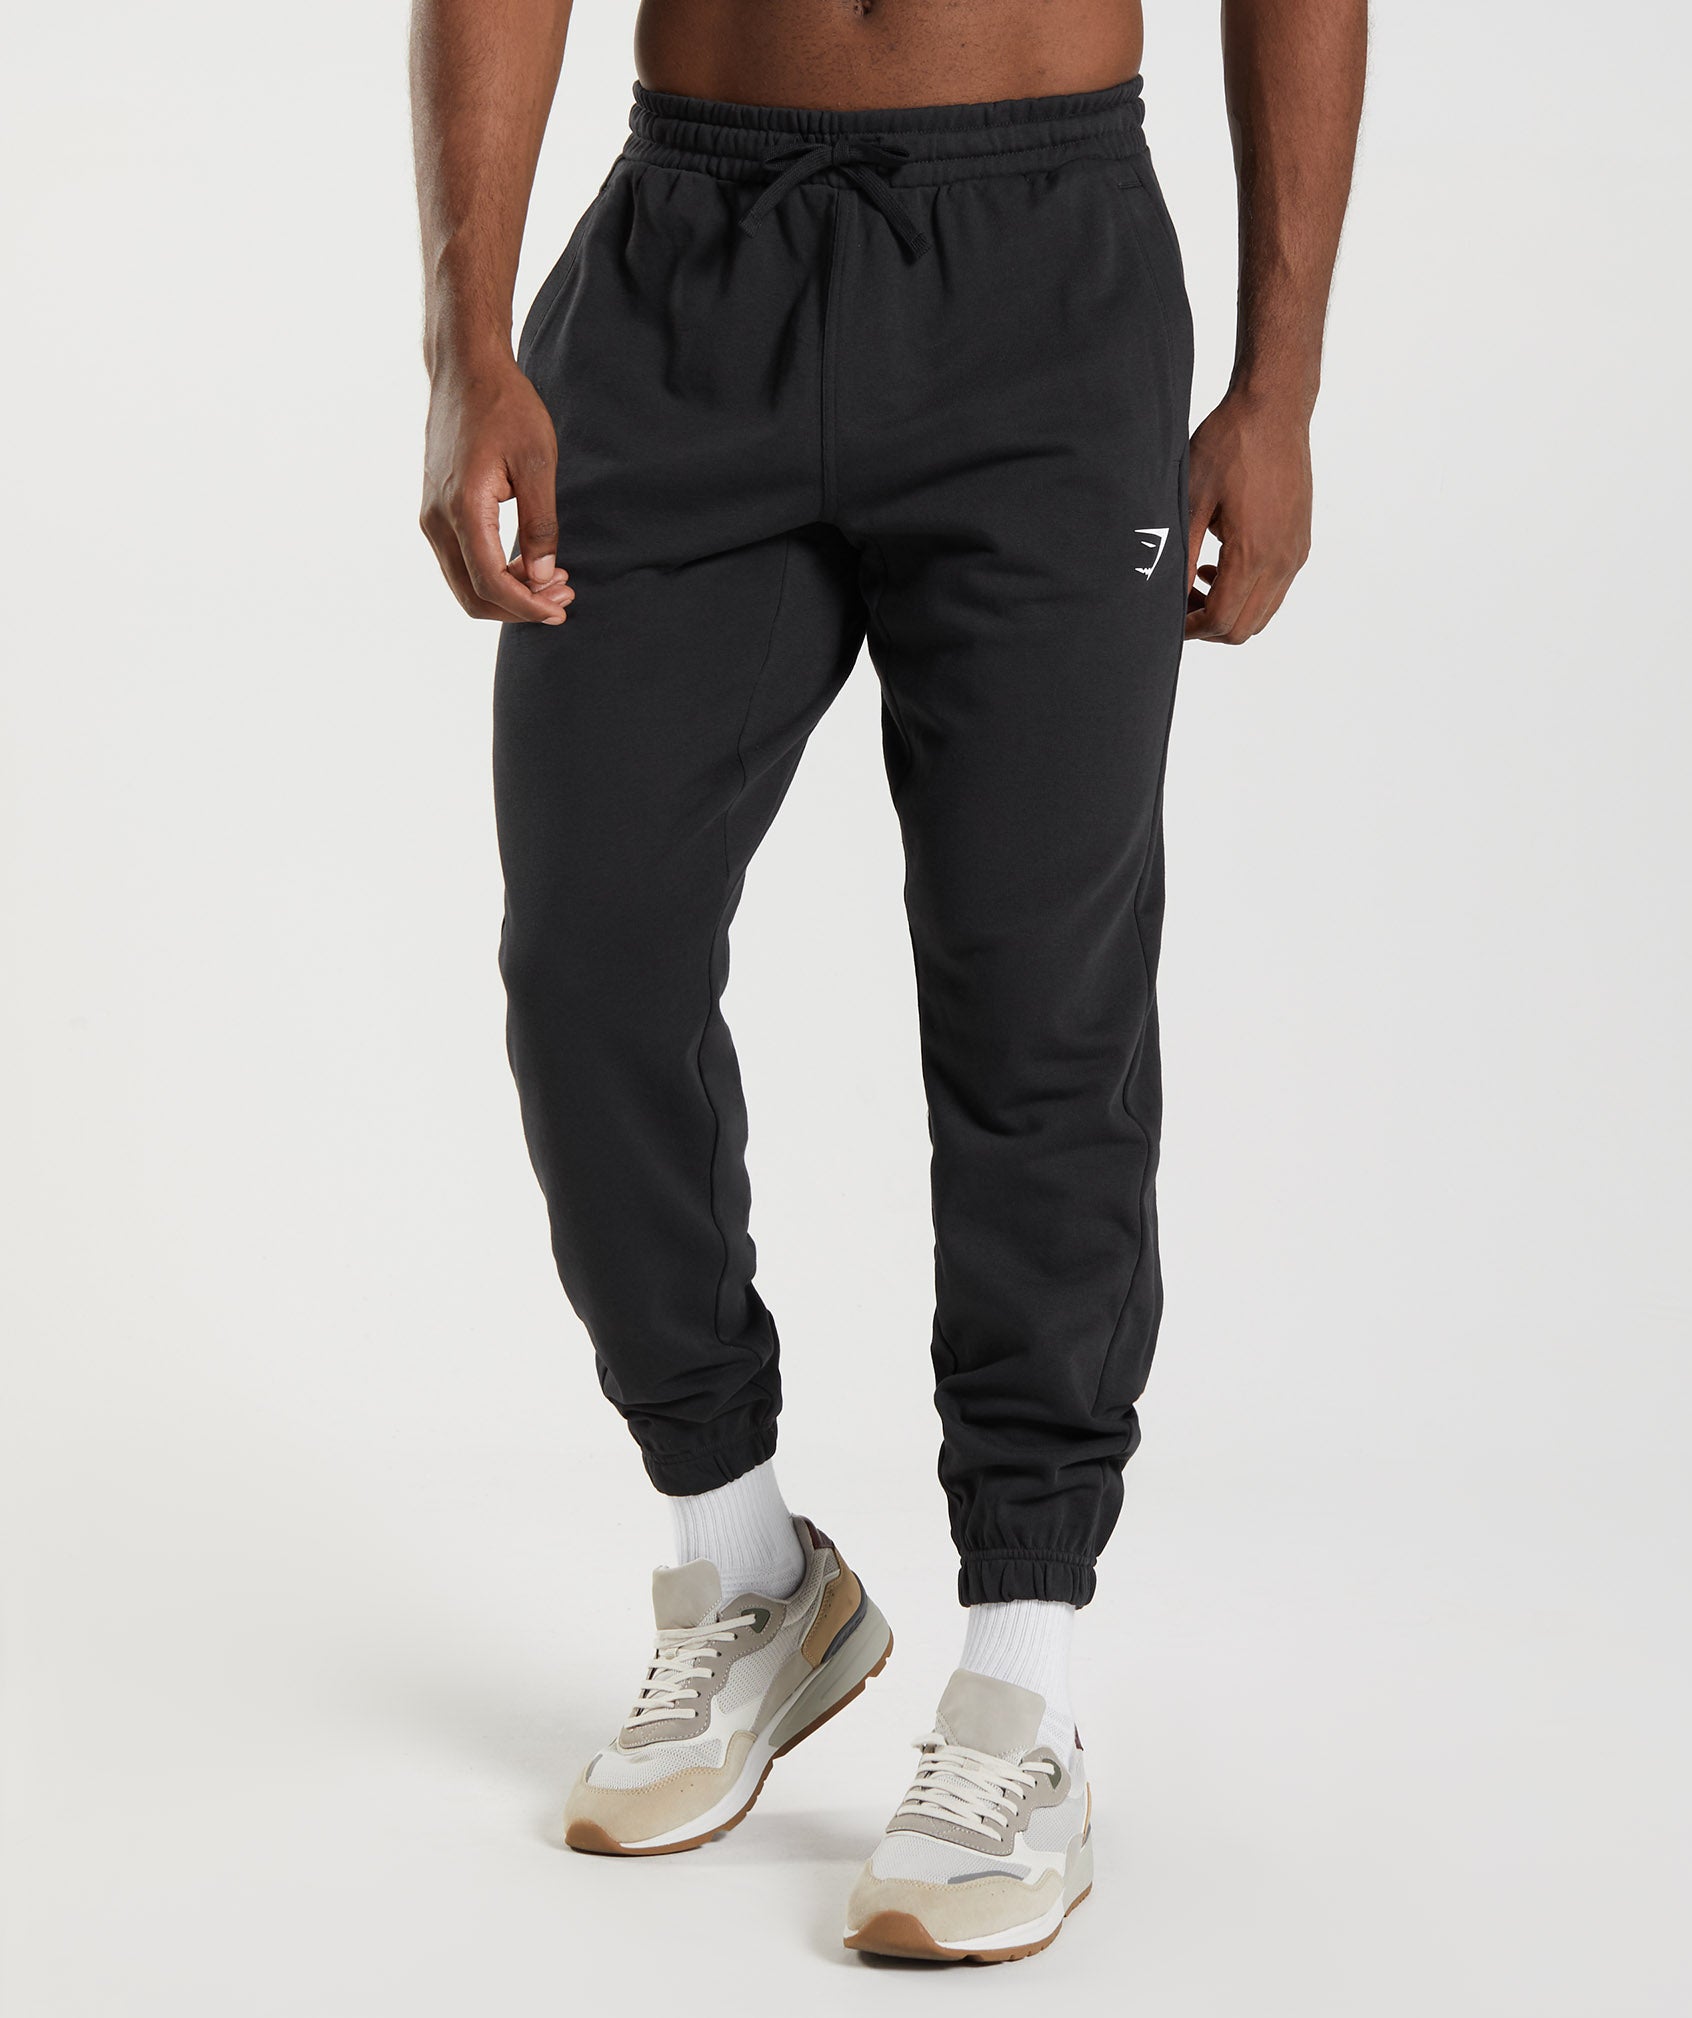  TBMPOY Men's Tapered Running Jogger Athletic Sweatpants Gym  Training Pants Black XS : Clothing, Shoes & Jewelry